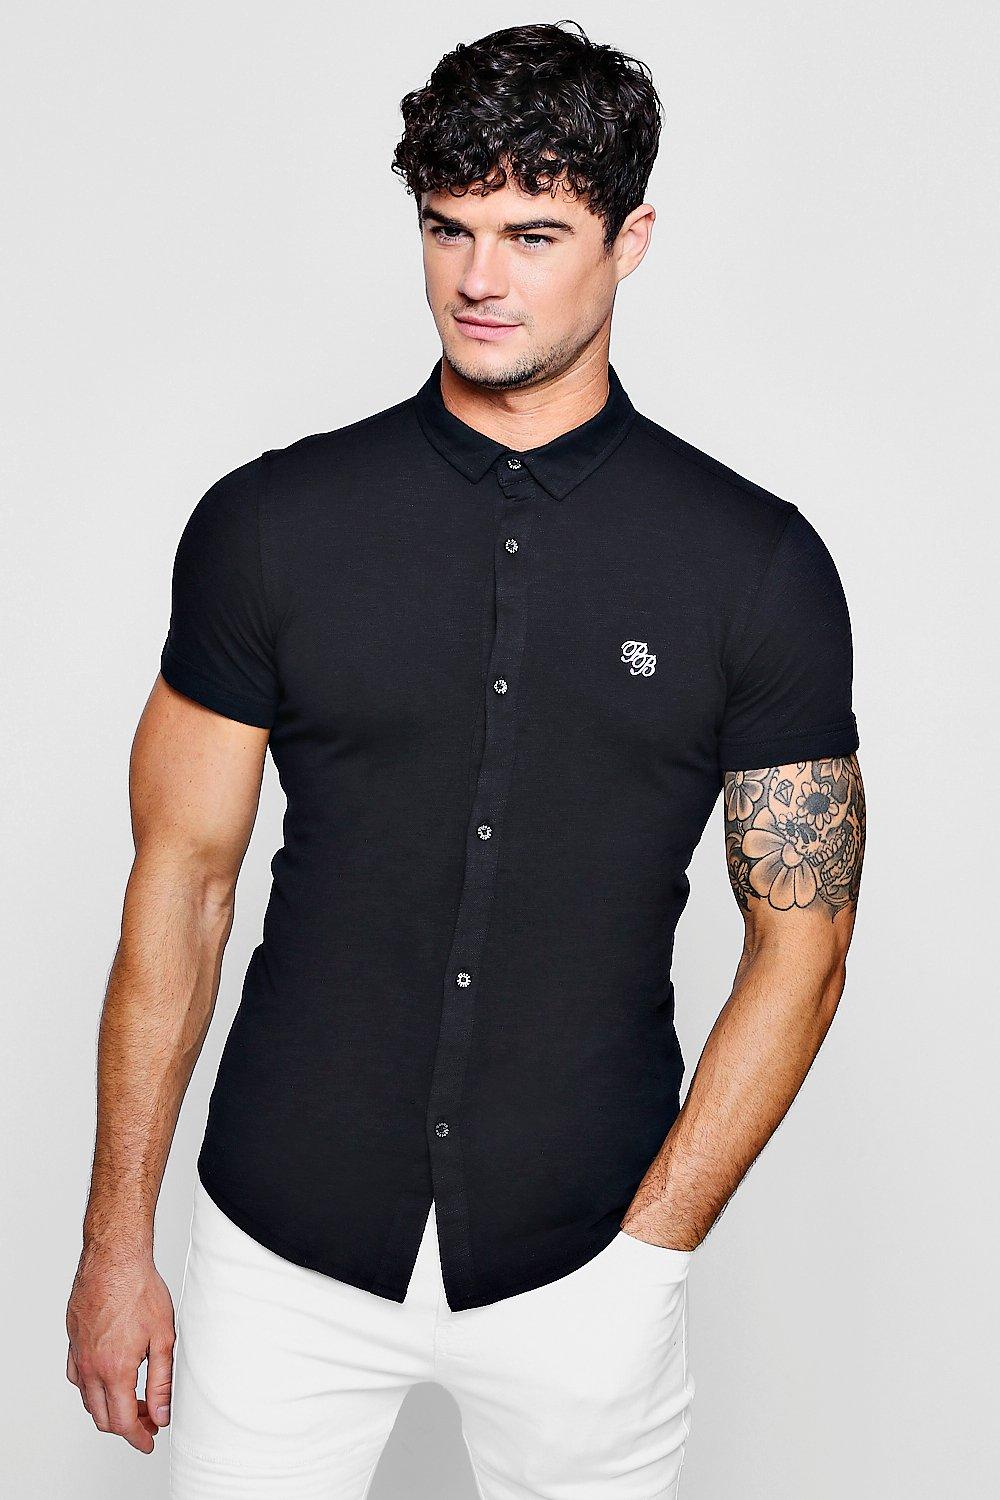 mens muscle fit shirts